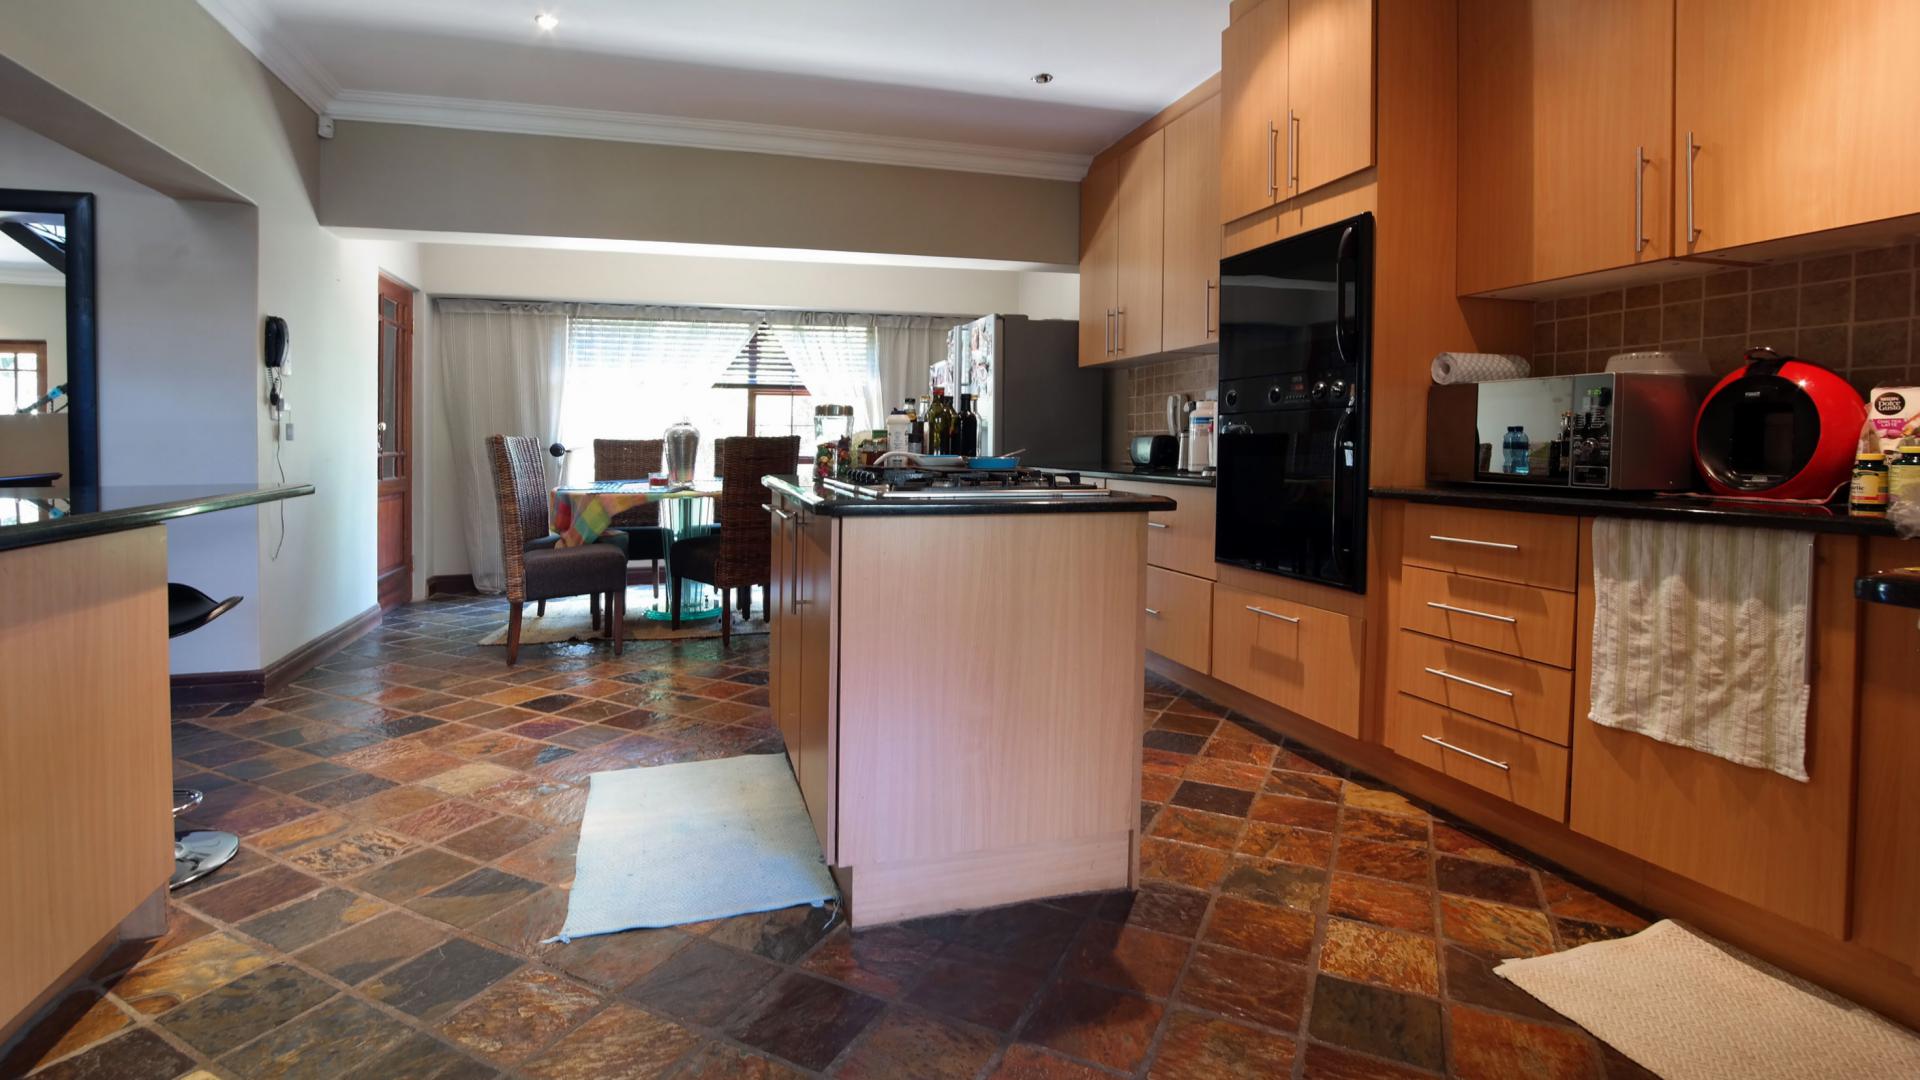 Kitchen - 30 square meters of property in Willow Acres Estate